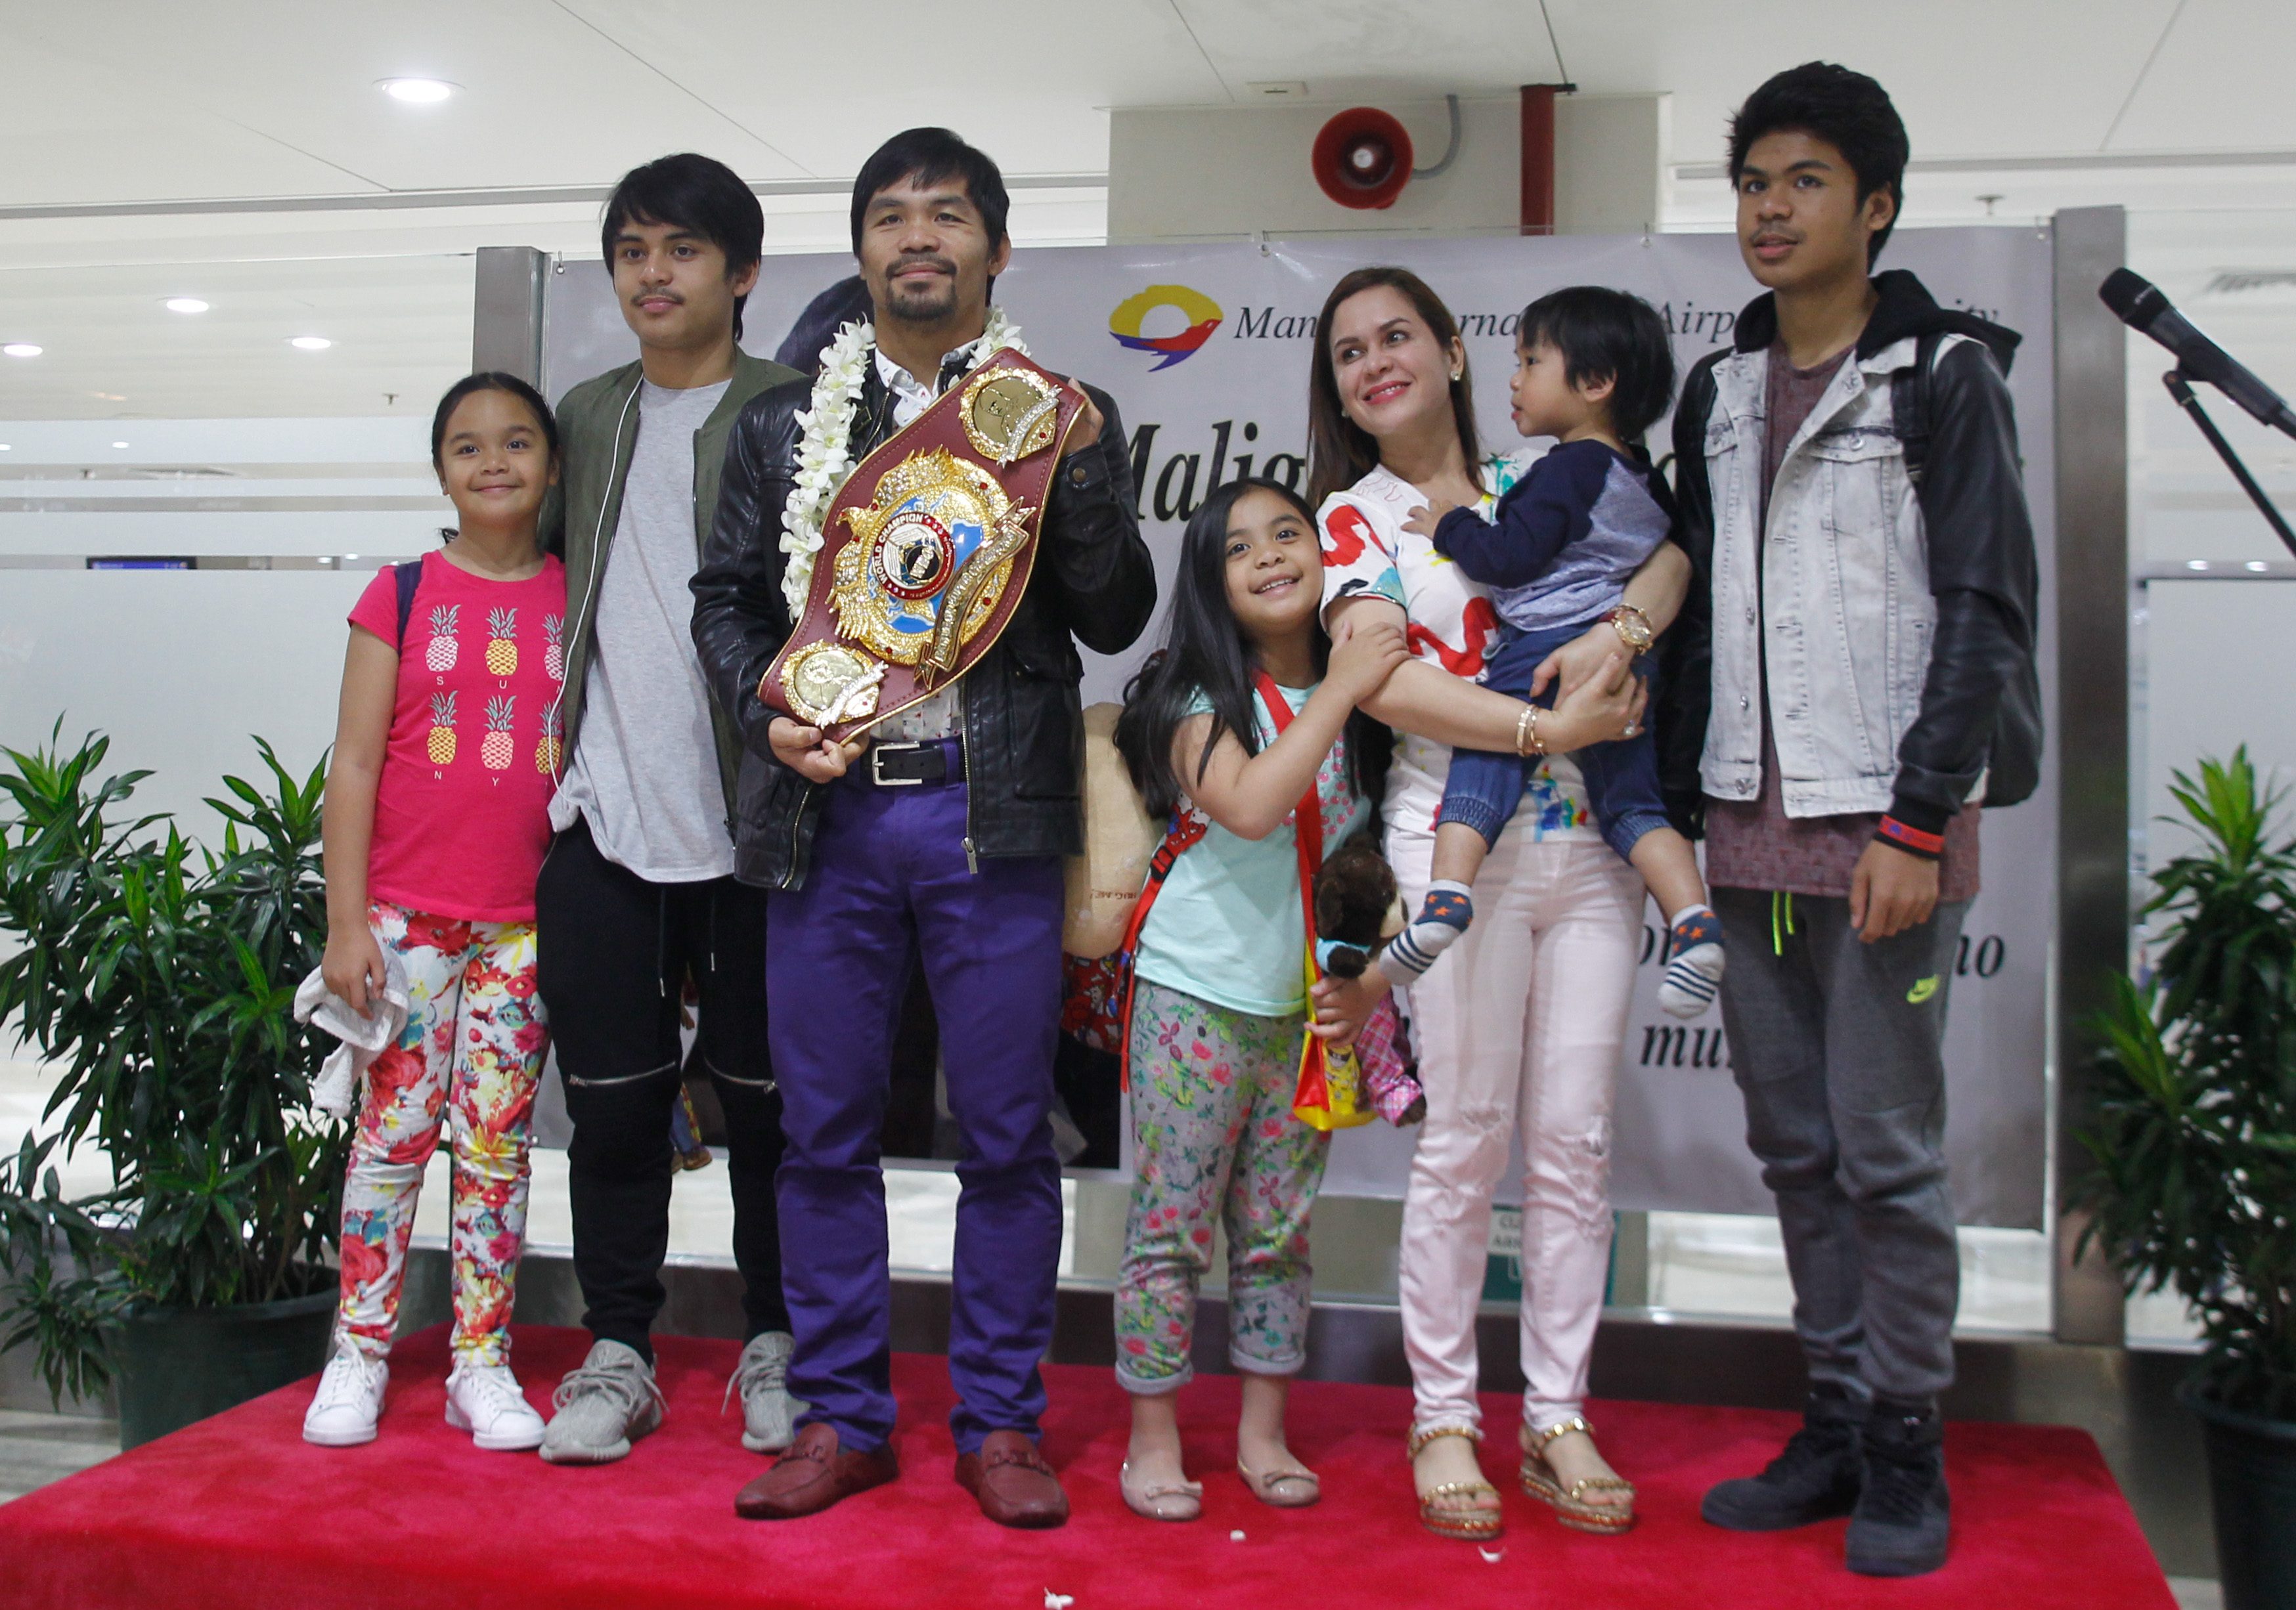 Filipino boxing icon Manny 'Pacman' Pacquiao (3-L) holding his World Boxing Organization WBO International Welterweight Championship title poses for pictures upon his arrival at the Ninoy Aquino International Airport in Manila, Philippines, 14 April 2016. Philippine boxer Manny Pacquiao arrived in Manila after his unanimous win over US boxer Timothy Bradley in Las Vegas, USA in their World Boxing Organization WBO International Welterweight Championship title bout. Pacquiao declared his retirement from boxing following his match to focus on his family and political career. Pacquiao is running for Senator in the upcoming Philippine elections on 09 May. EPA/MARK R. CRISTINO 